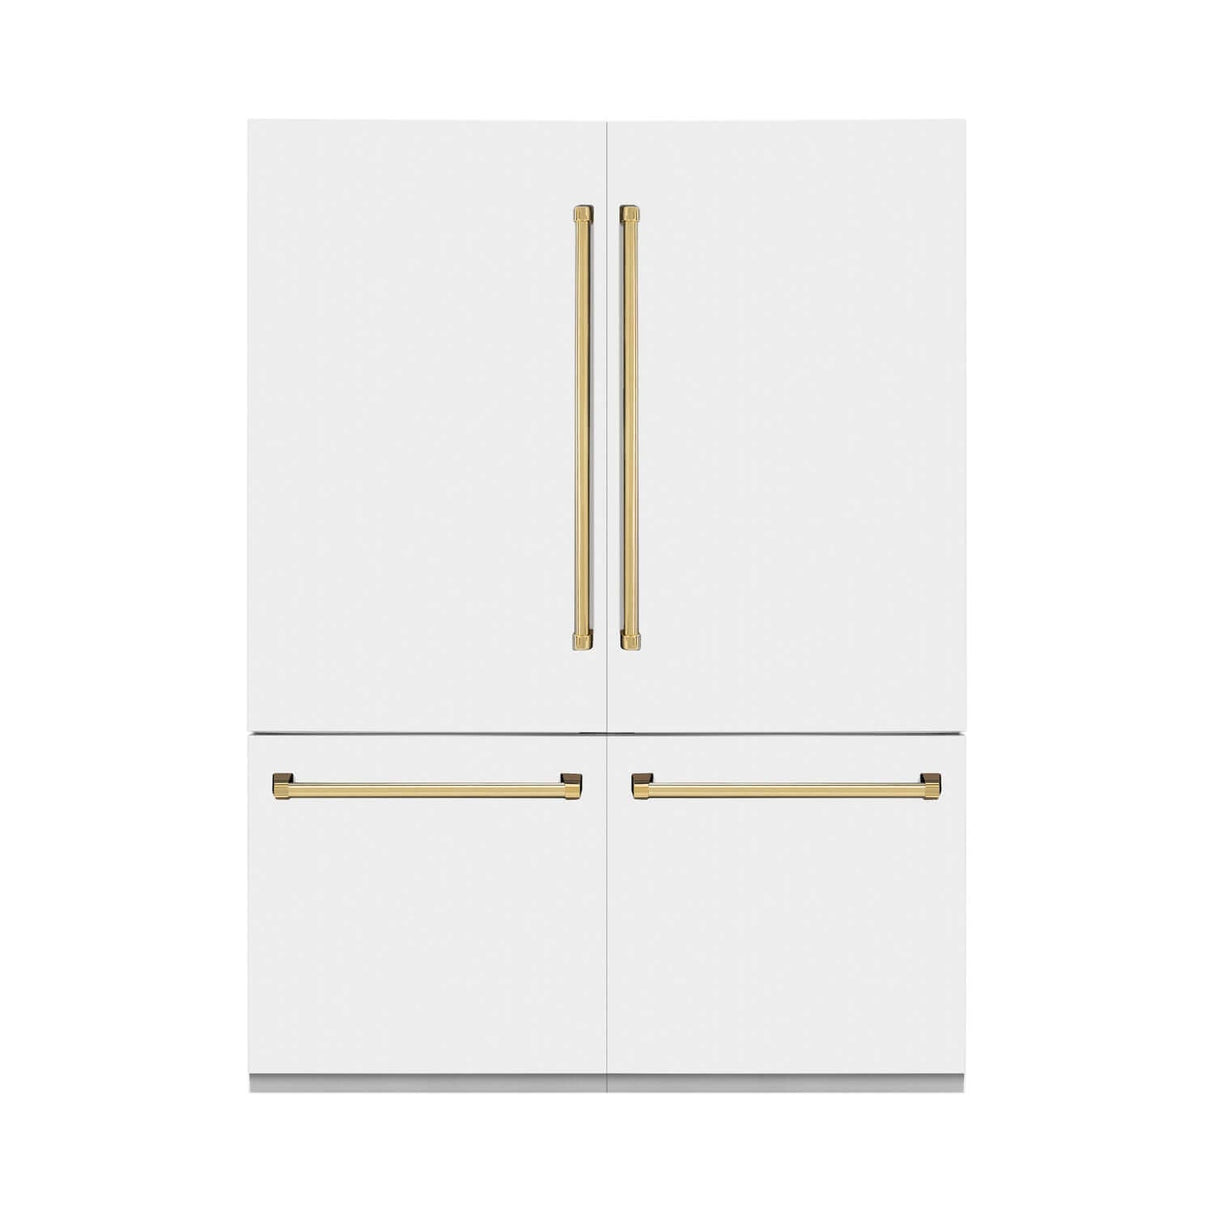 ZLINE Autograph Edition 60 in. 32.2 cu. ft. Built-in 4-Door French Door Refrigerator with Internal Water and Ice Dispenser in White Matte with Polished Gold Accents (RBIVZ-WM-60-G)